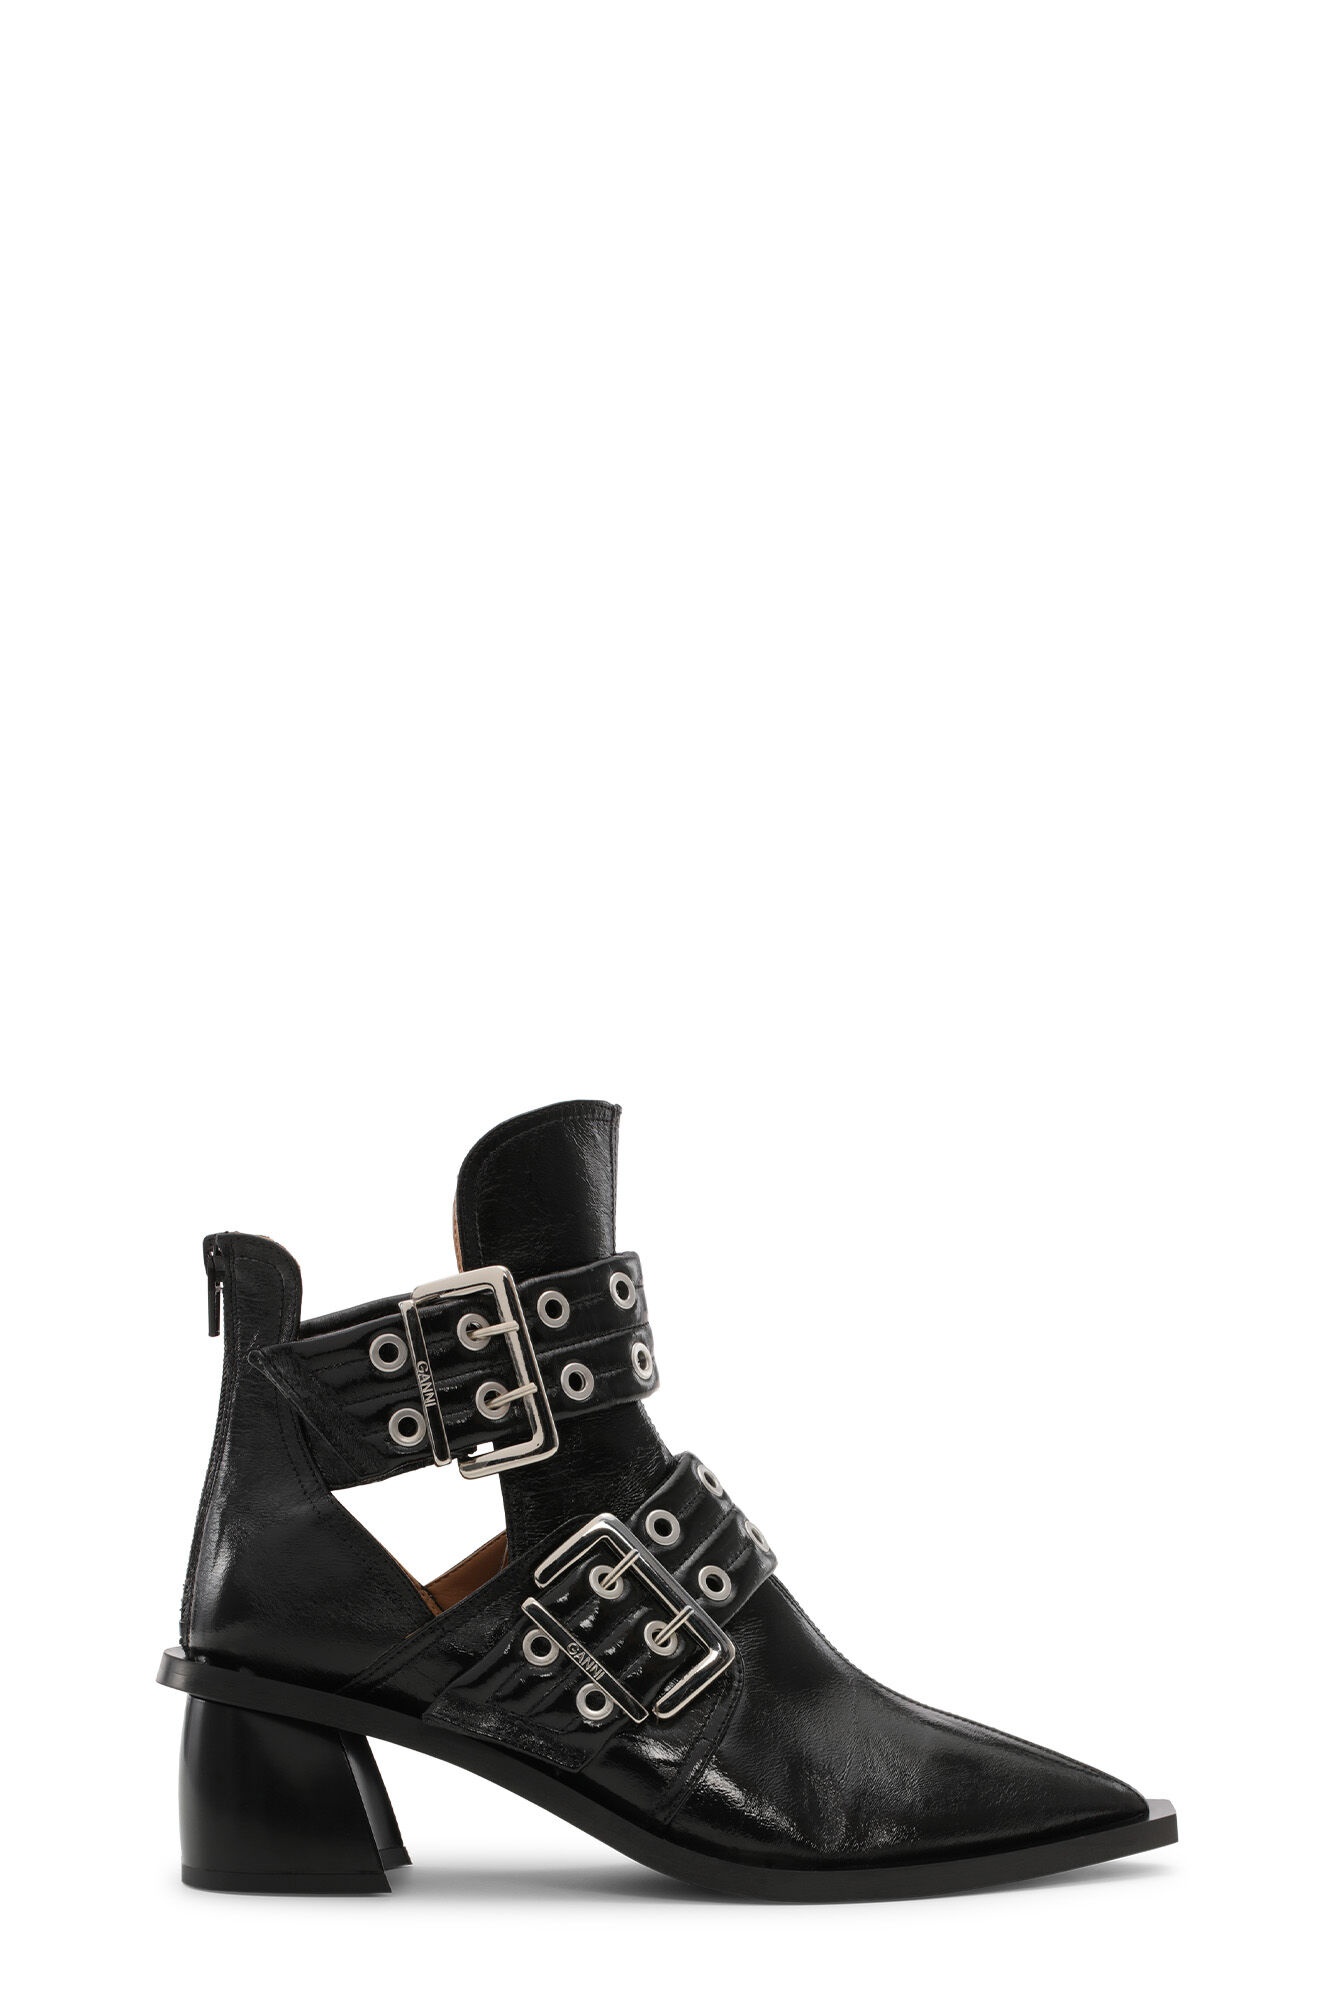 BLACK CHUNKY BUCKLE OPEN CUT BOOTS - 1